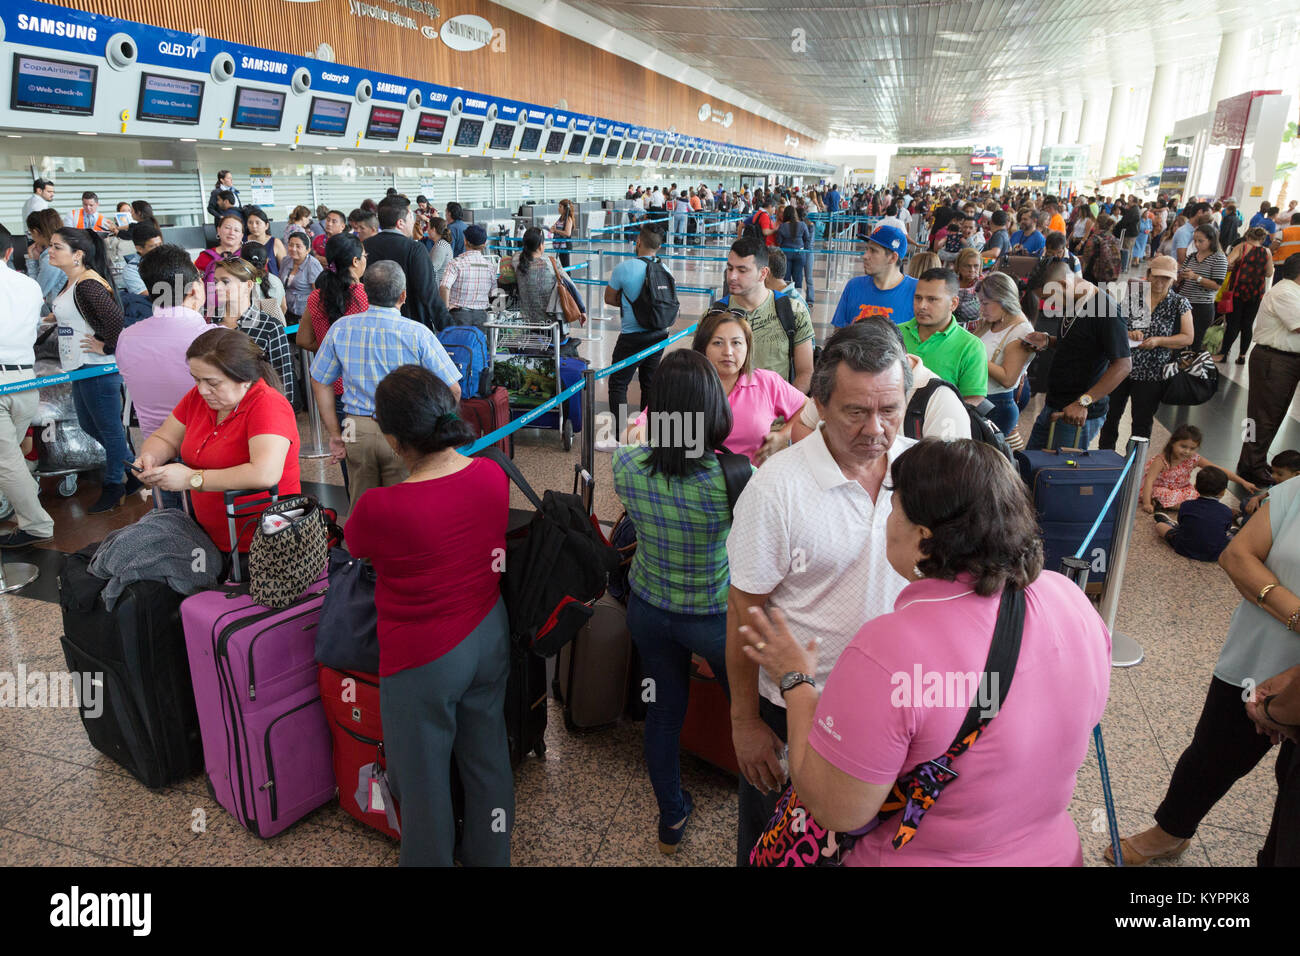 Crowds of people at Guayaquil airport check in; José Joaquín de Olmedo International Airport, Guayaquil, Ecuador South America Stock Photo